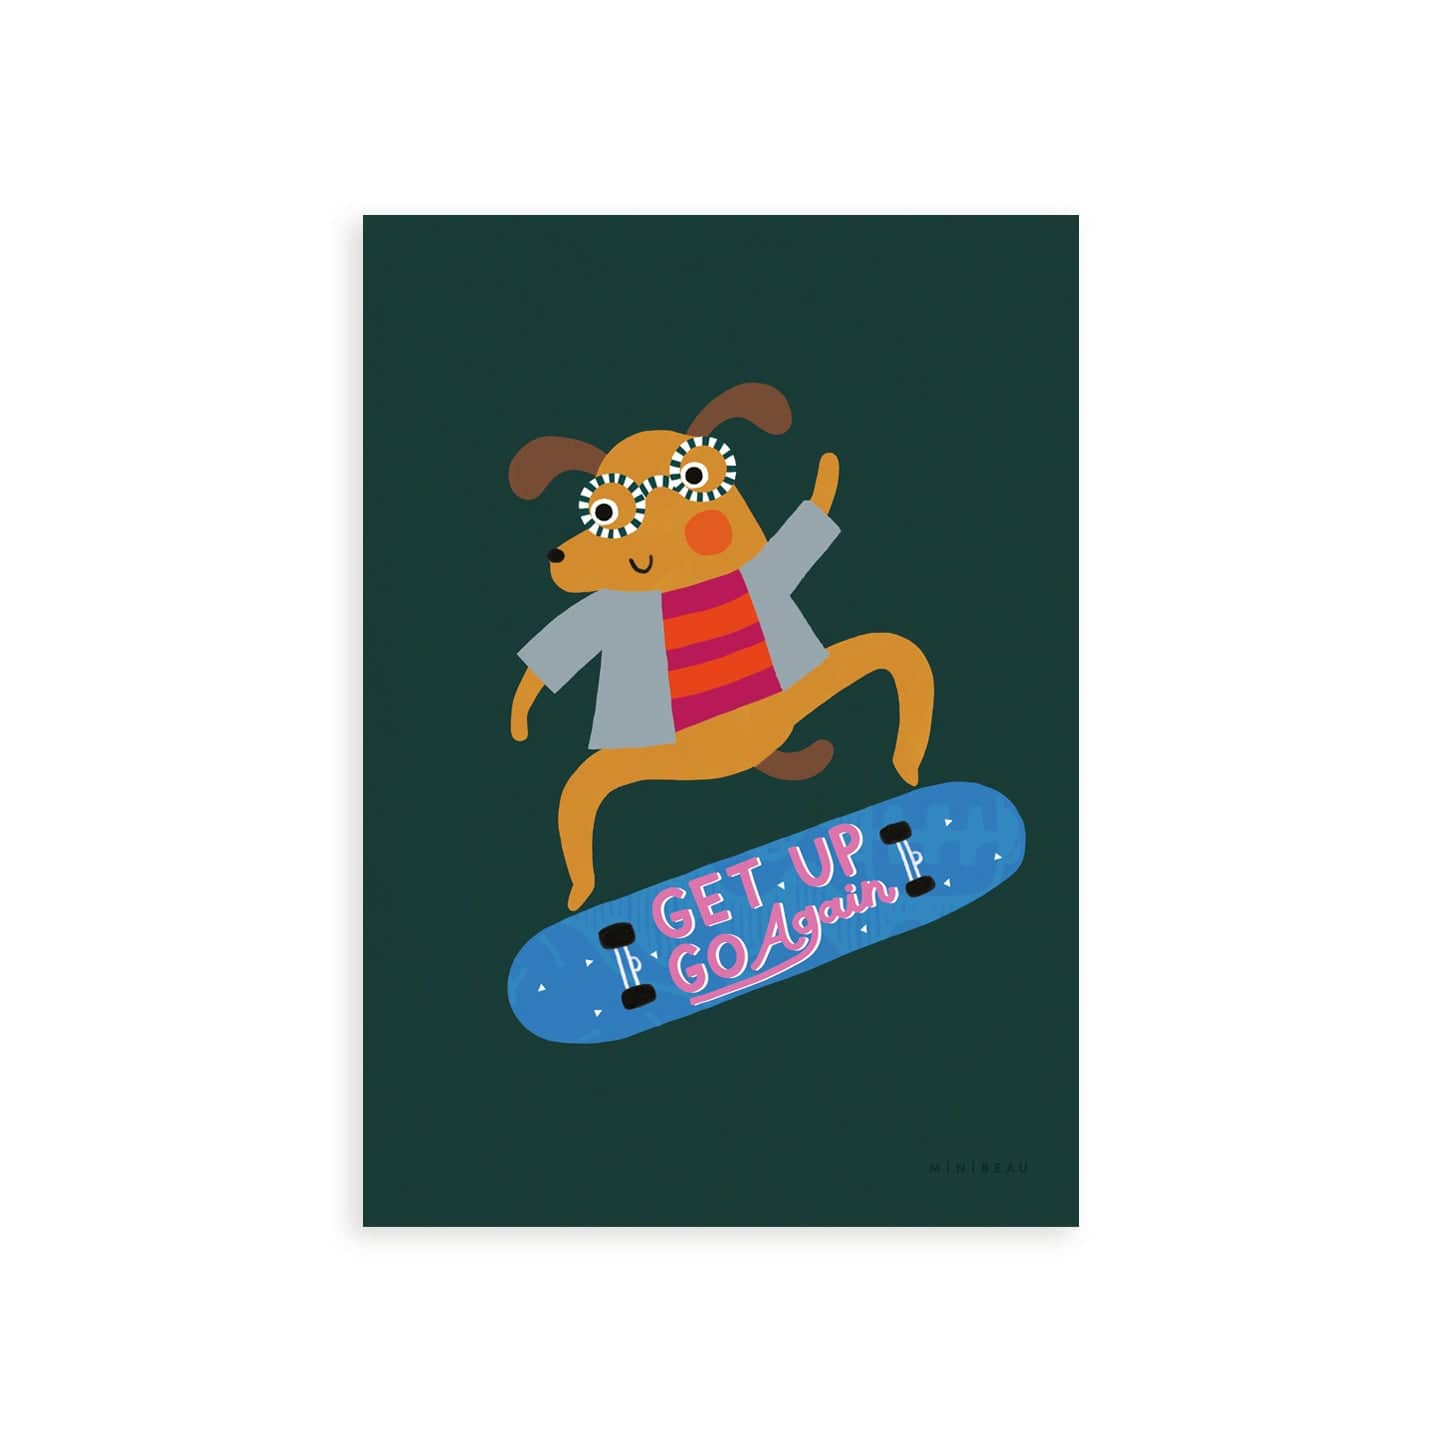 Our Rad Dog Art Print features a brown dog doing a flip on a skateboard. The dog is wearing a denim blue jacket and a bright pink and orange top while wearing black and white striped glasses on a dark green background.